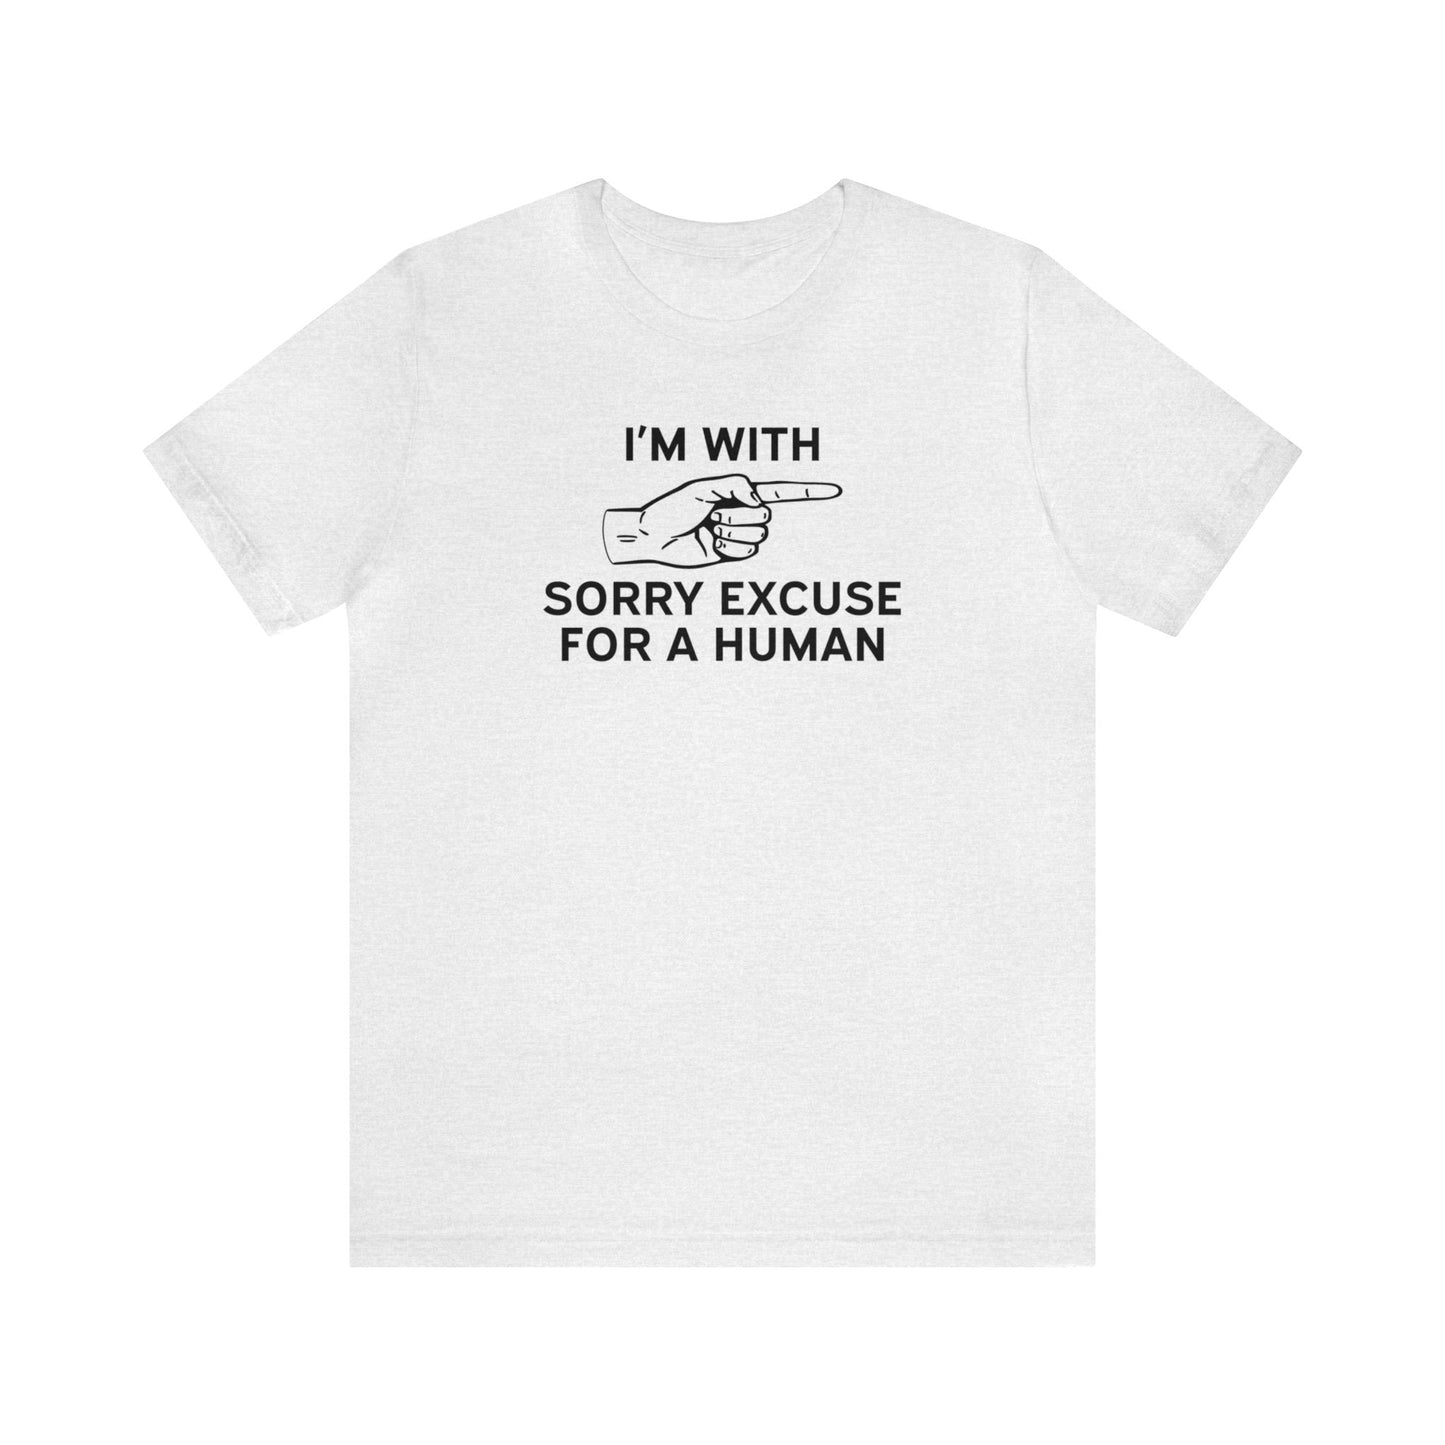 I'm With Sorry Excuse for a Human - Unisex T-Shirt